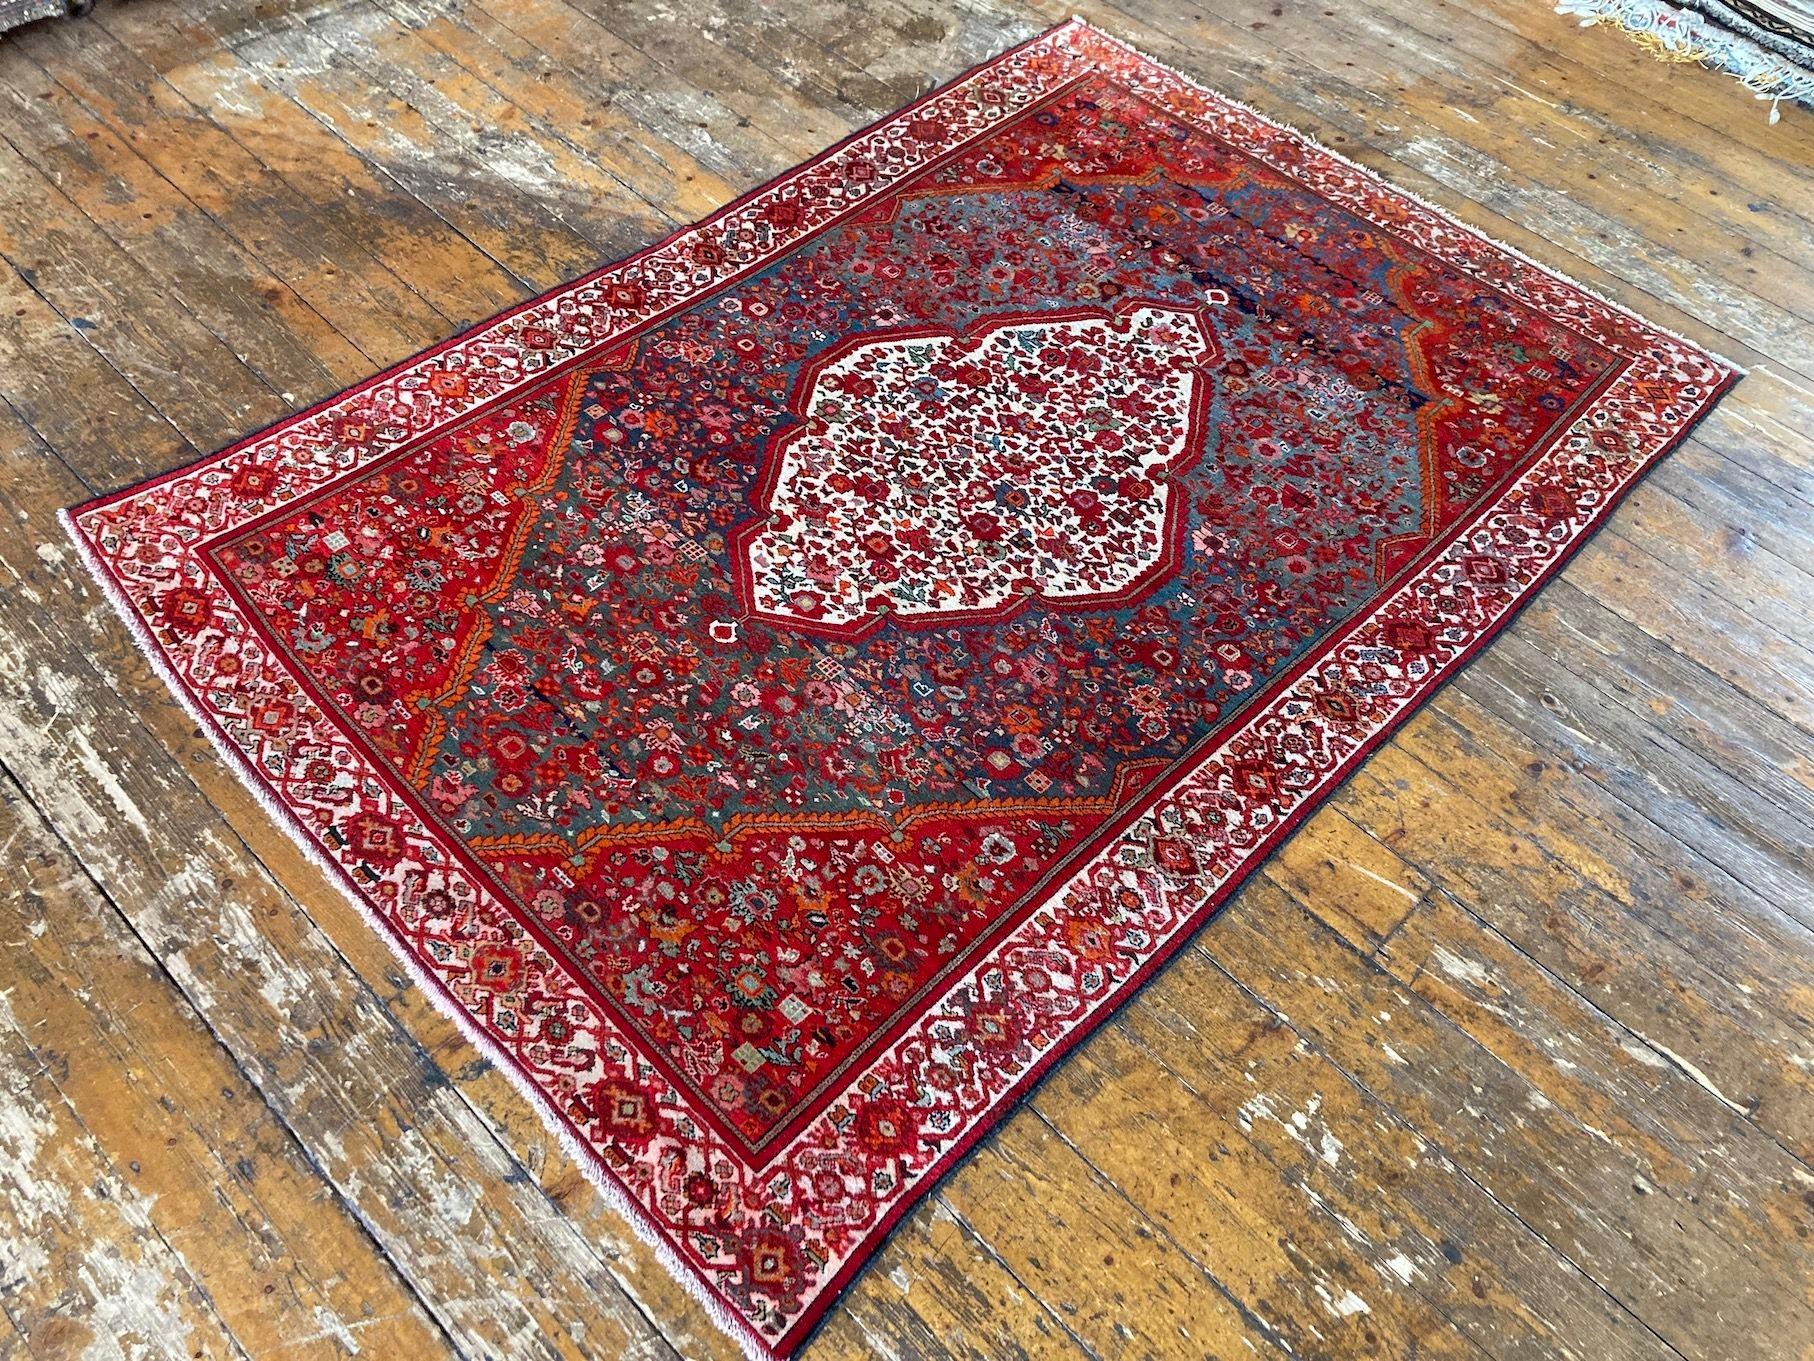 Early 20th Century Antique Mishan Malayer Rug 1.98m x 1.32m For Sale